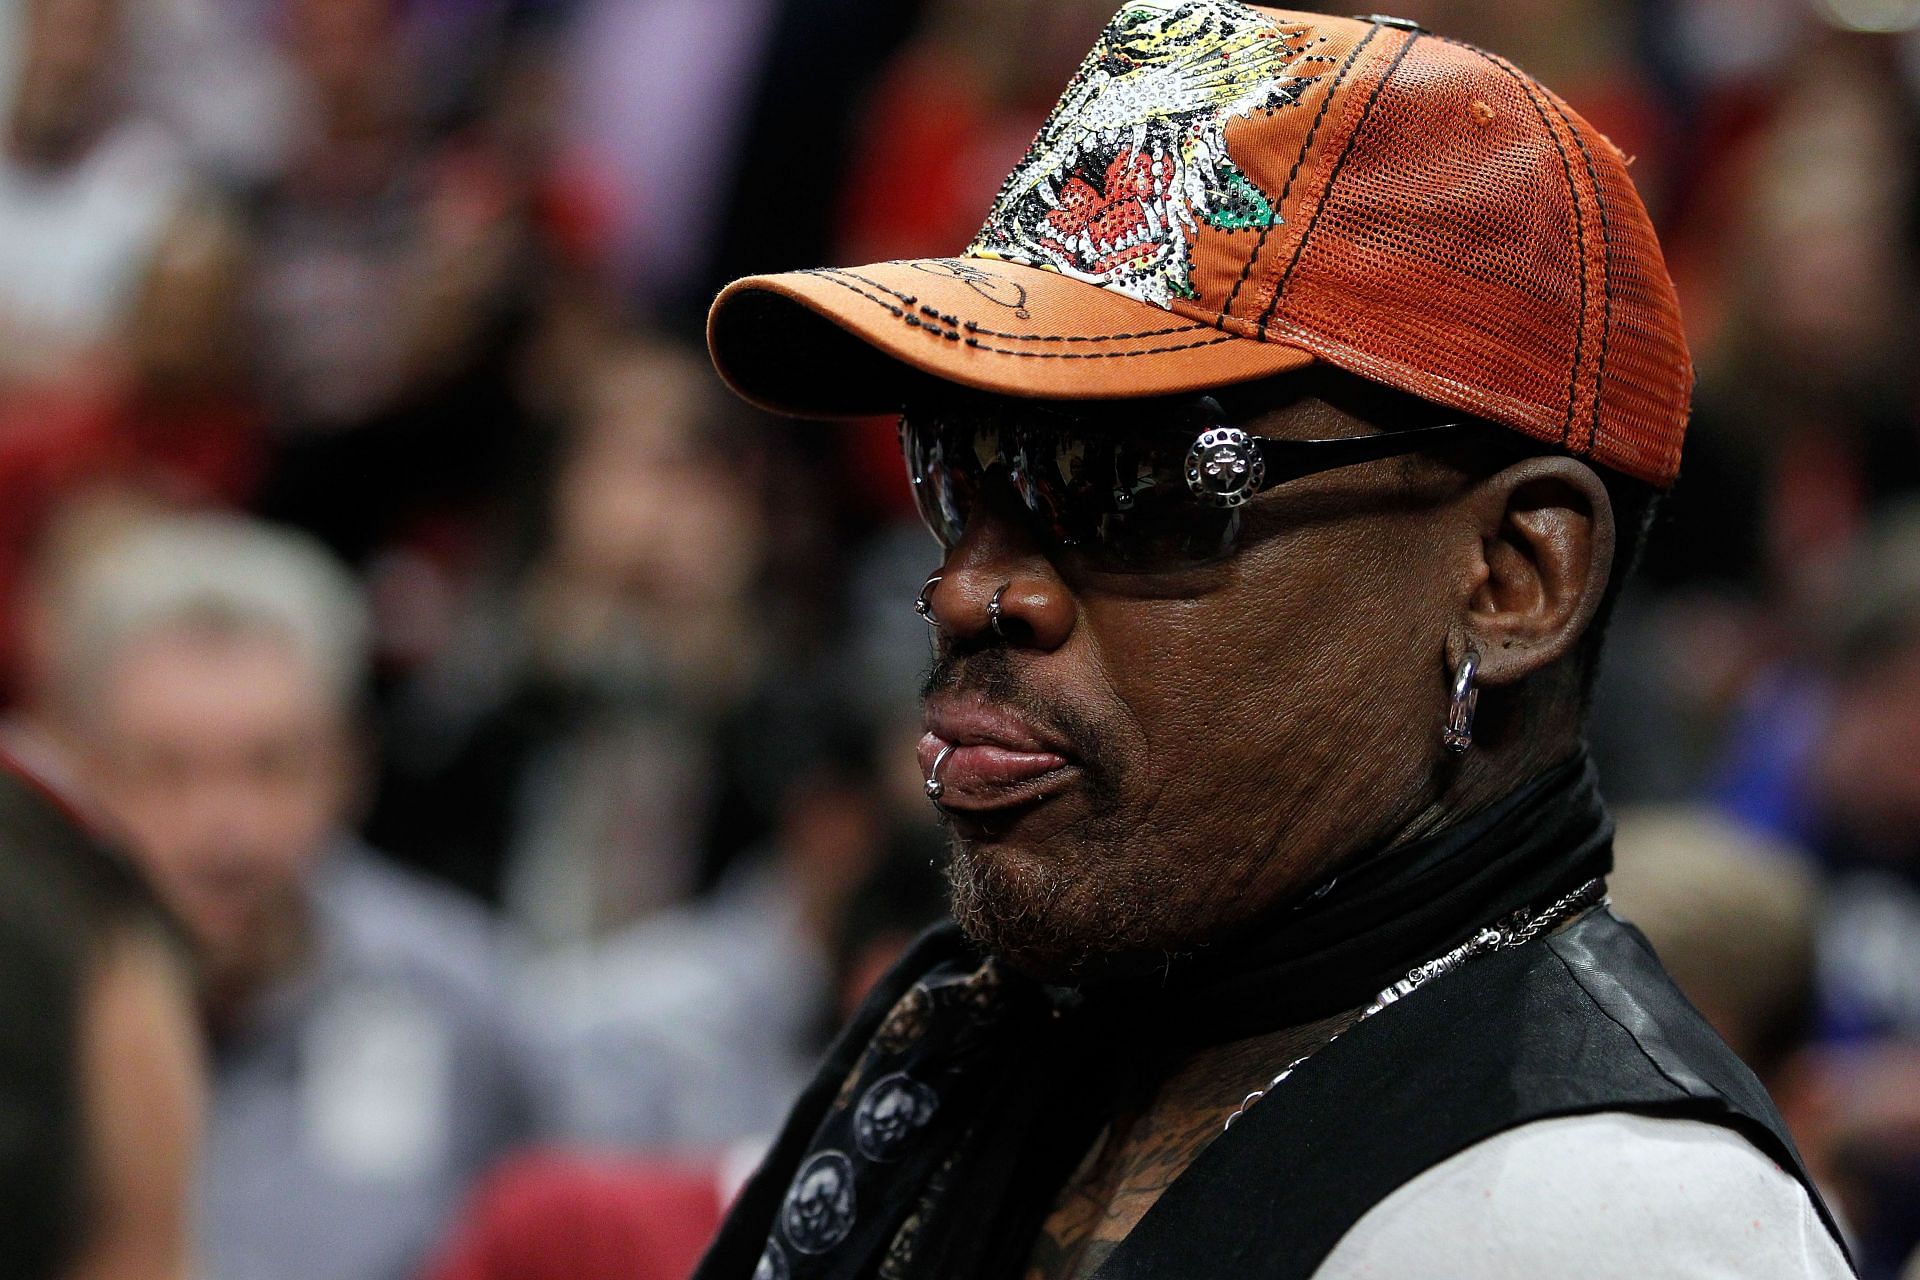 Basketball Hall of Famer and former CHicago Bulls player Dennis Rodman looks on as the Chicago Bulls play against the Miami Heat in Game Two of the Eastern Conference Finals during the 2011 NBA Playoffs on May 18, 2011 at the United Center in Chicago, Illinois.